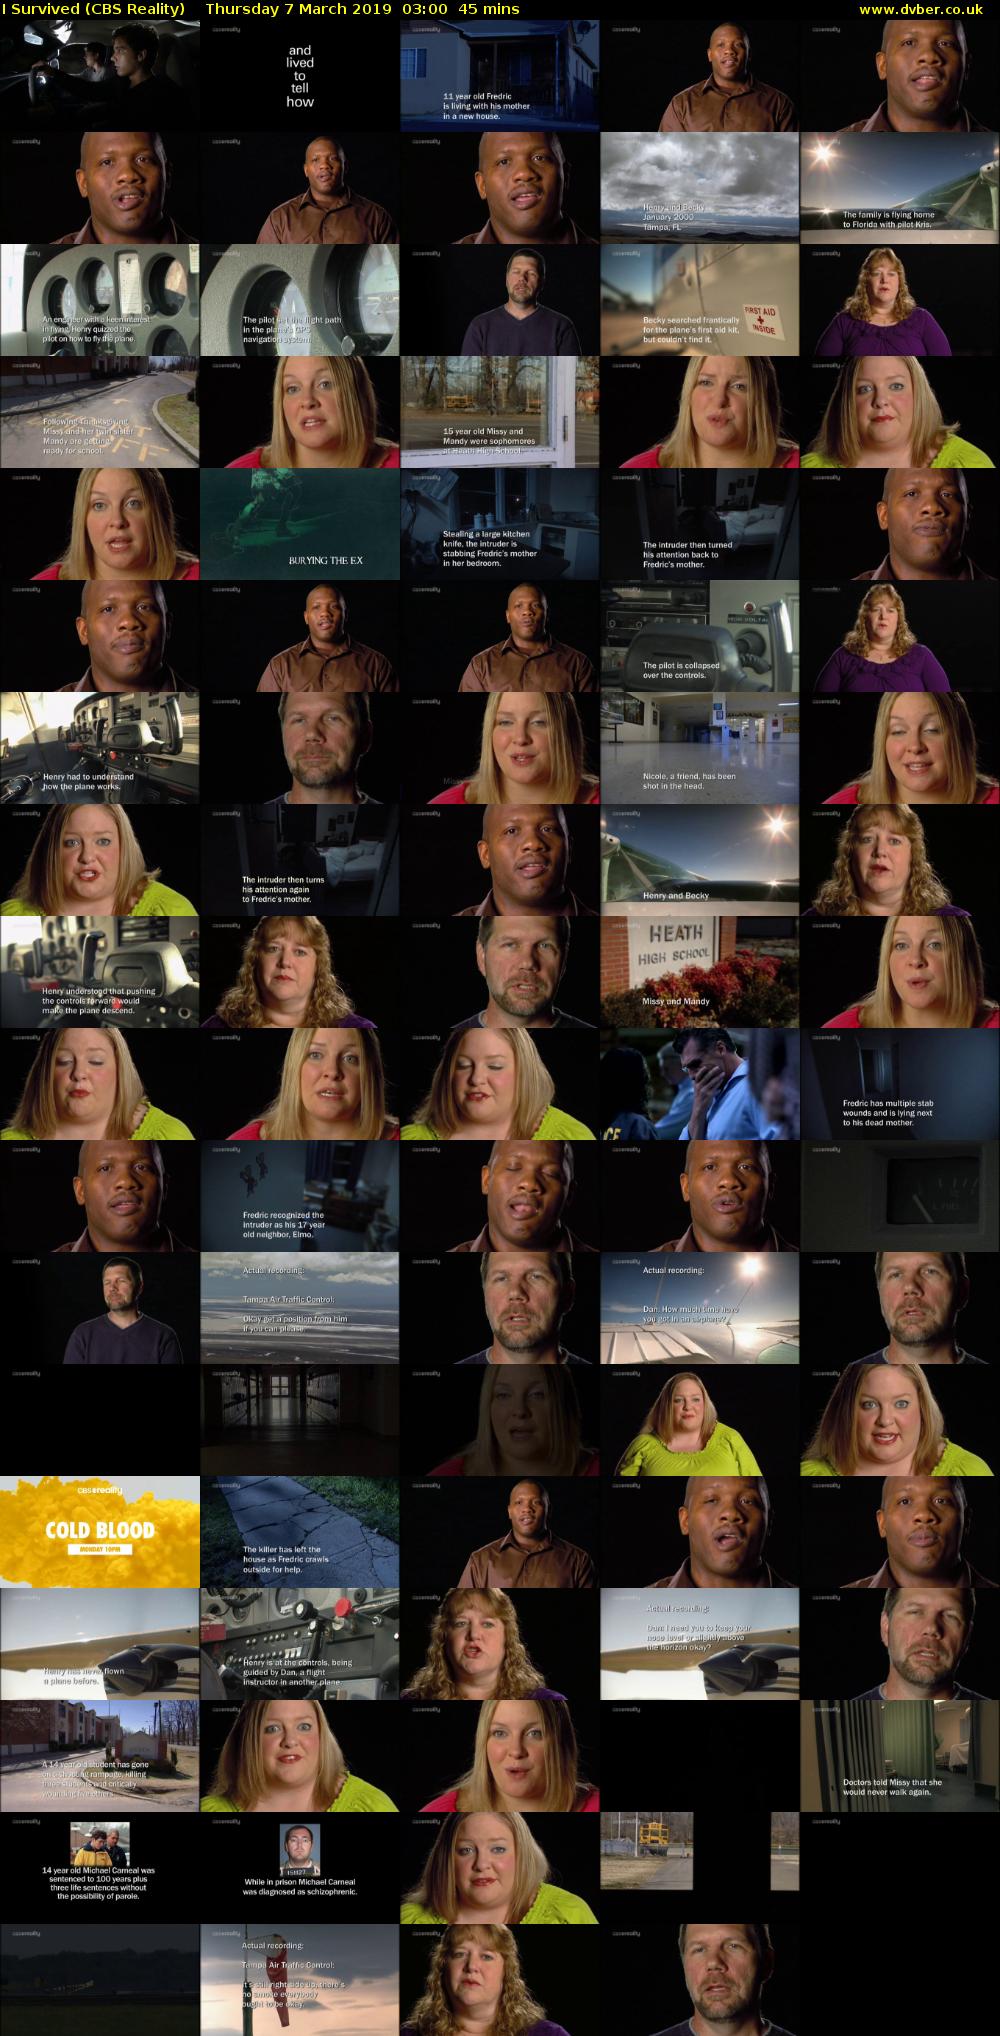 I Survived (CBS Reality) Thursday 7 March 2019 03:00 - 03:45